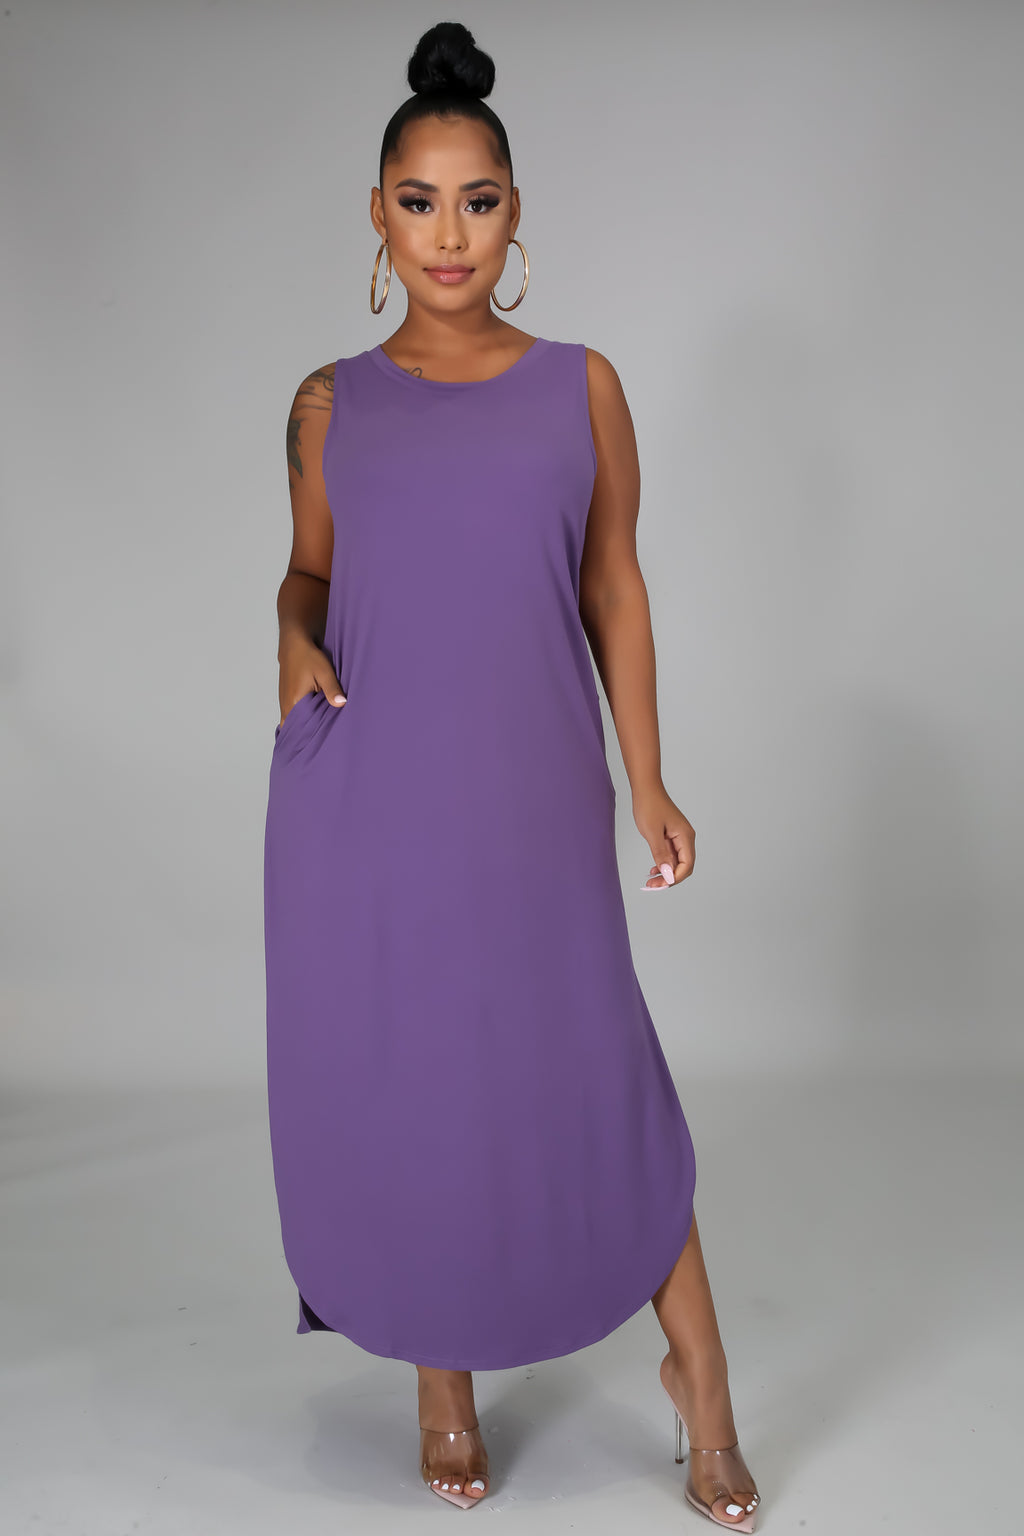 Waiting on You Dress - Classy & Sassy Styles Boutique